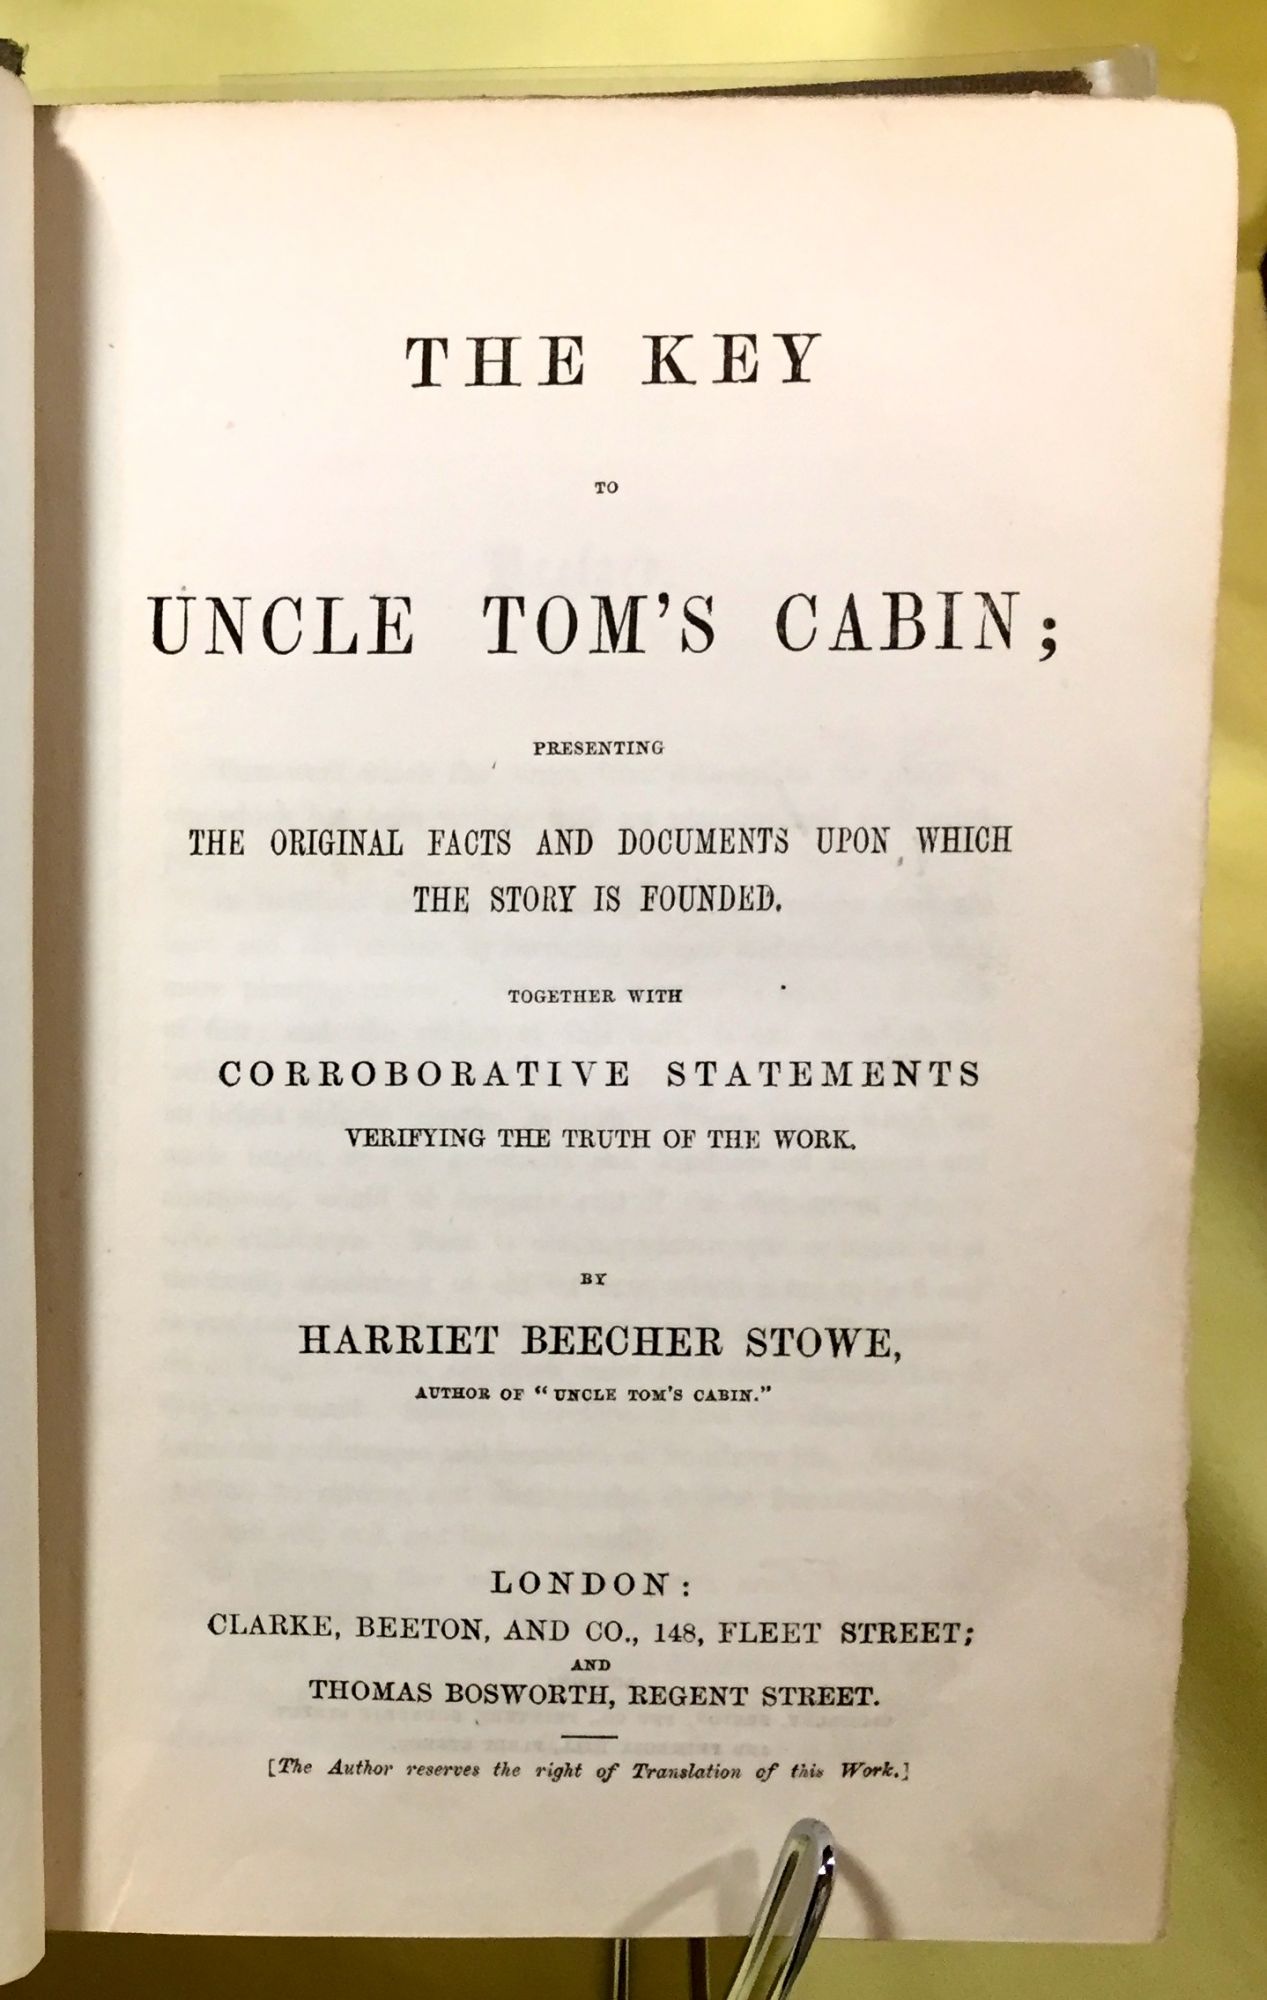 væv Tilslutte sende THE KEY TO UNCLE TOM'S CABIN; Presenting / The Original Facts and Documents  Upon Which the Story is Founded. / Together with Corroborative Statements  Verifying the Truth of the Work. By Harriet